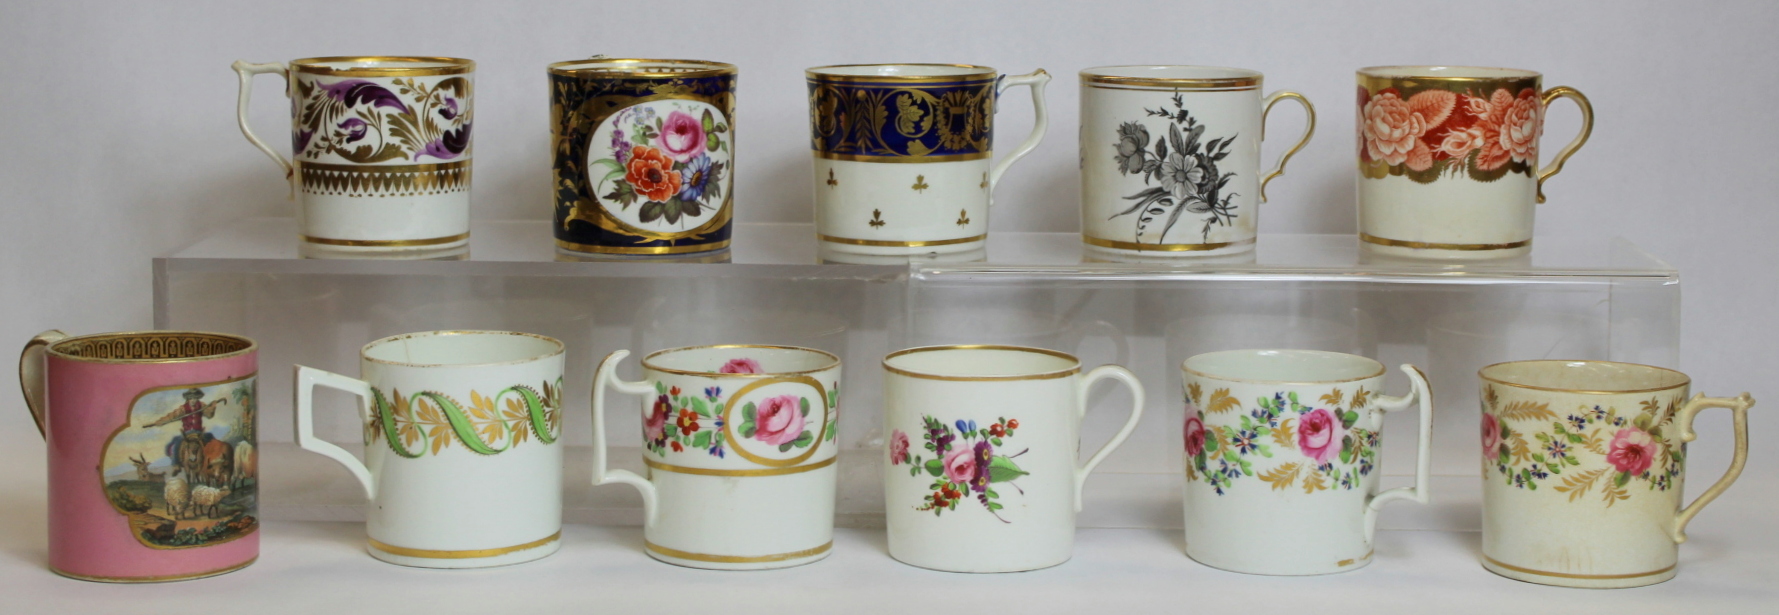 Ten early 19th century English porcelain coffee cans, mainly Derby with some Spode; also 19th